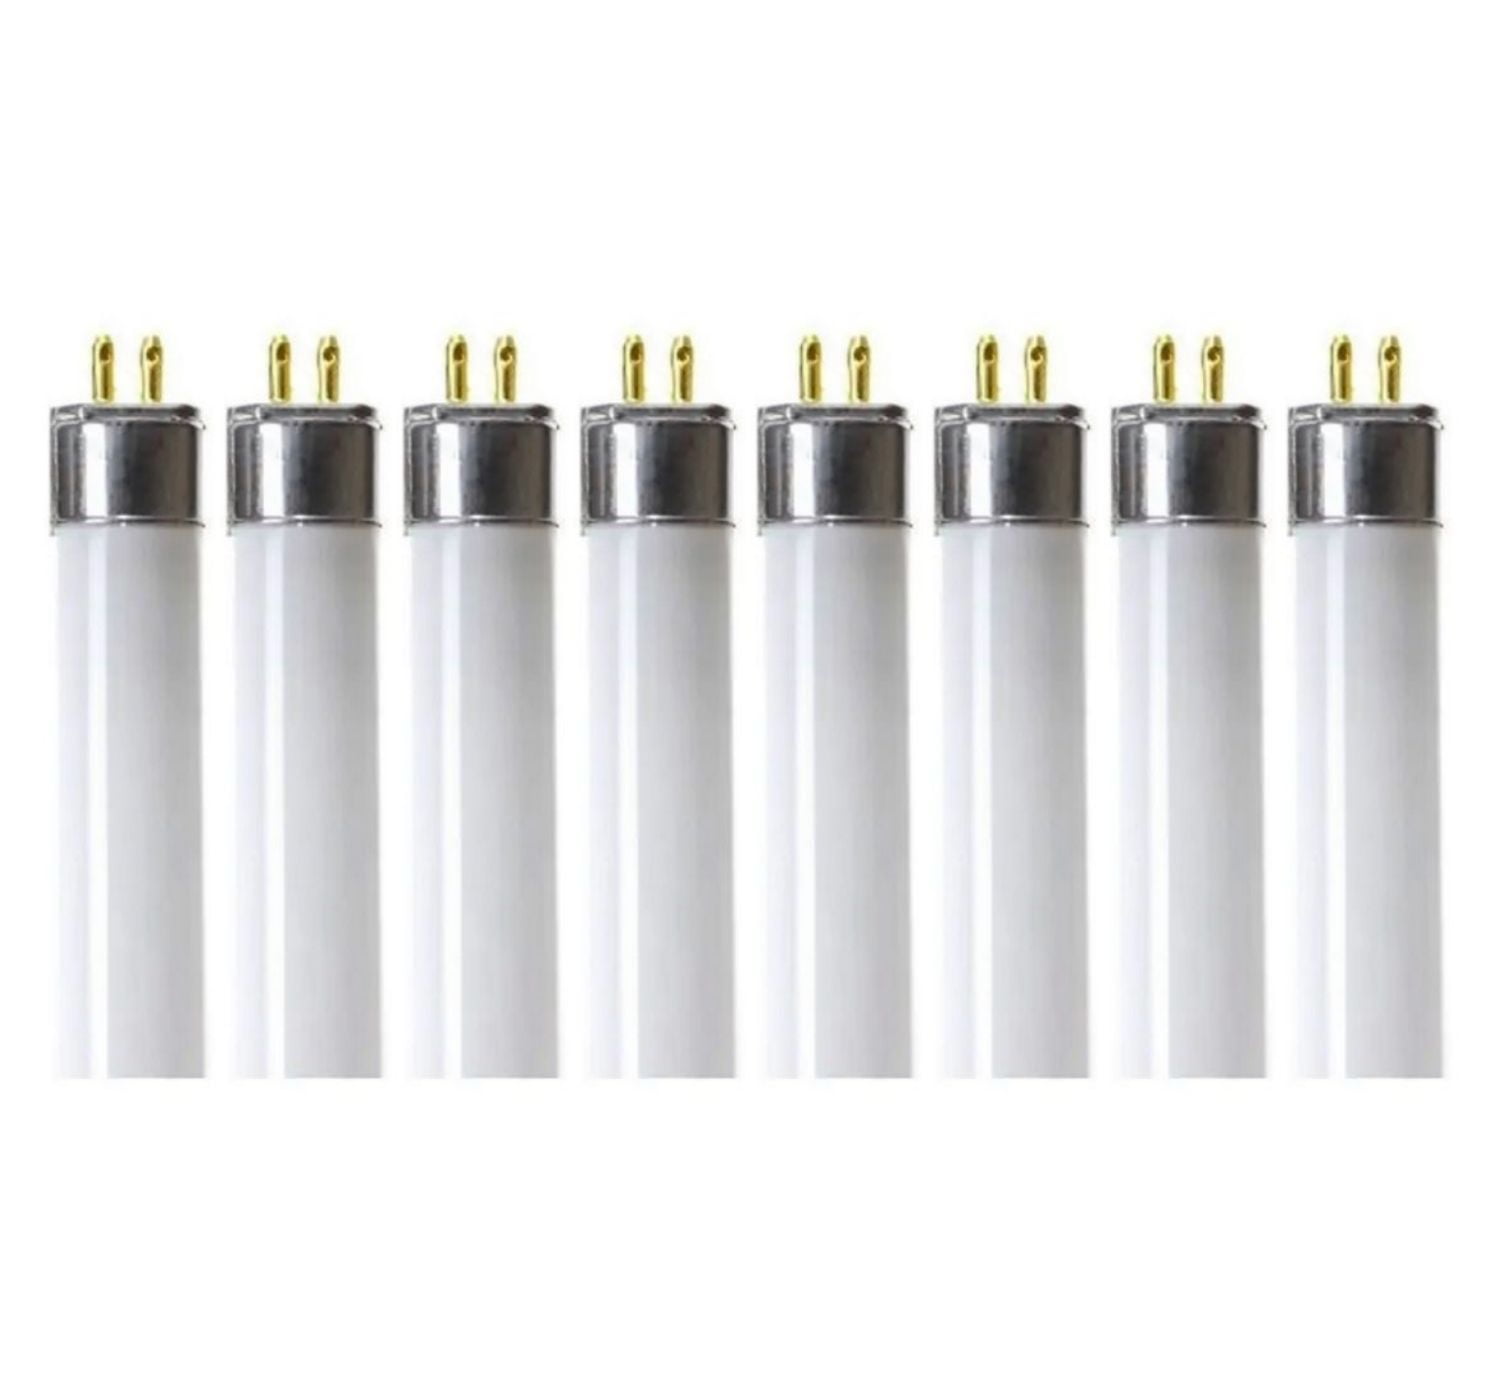 Sterl Lighting - Pack of 8 T5/WW 8.34